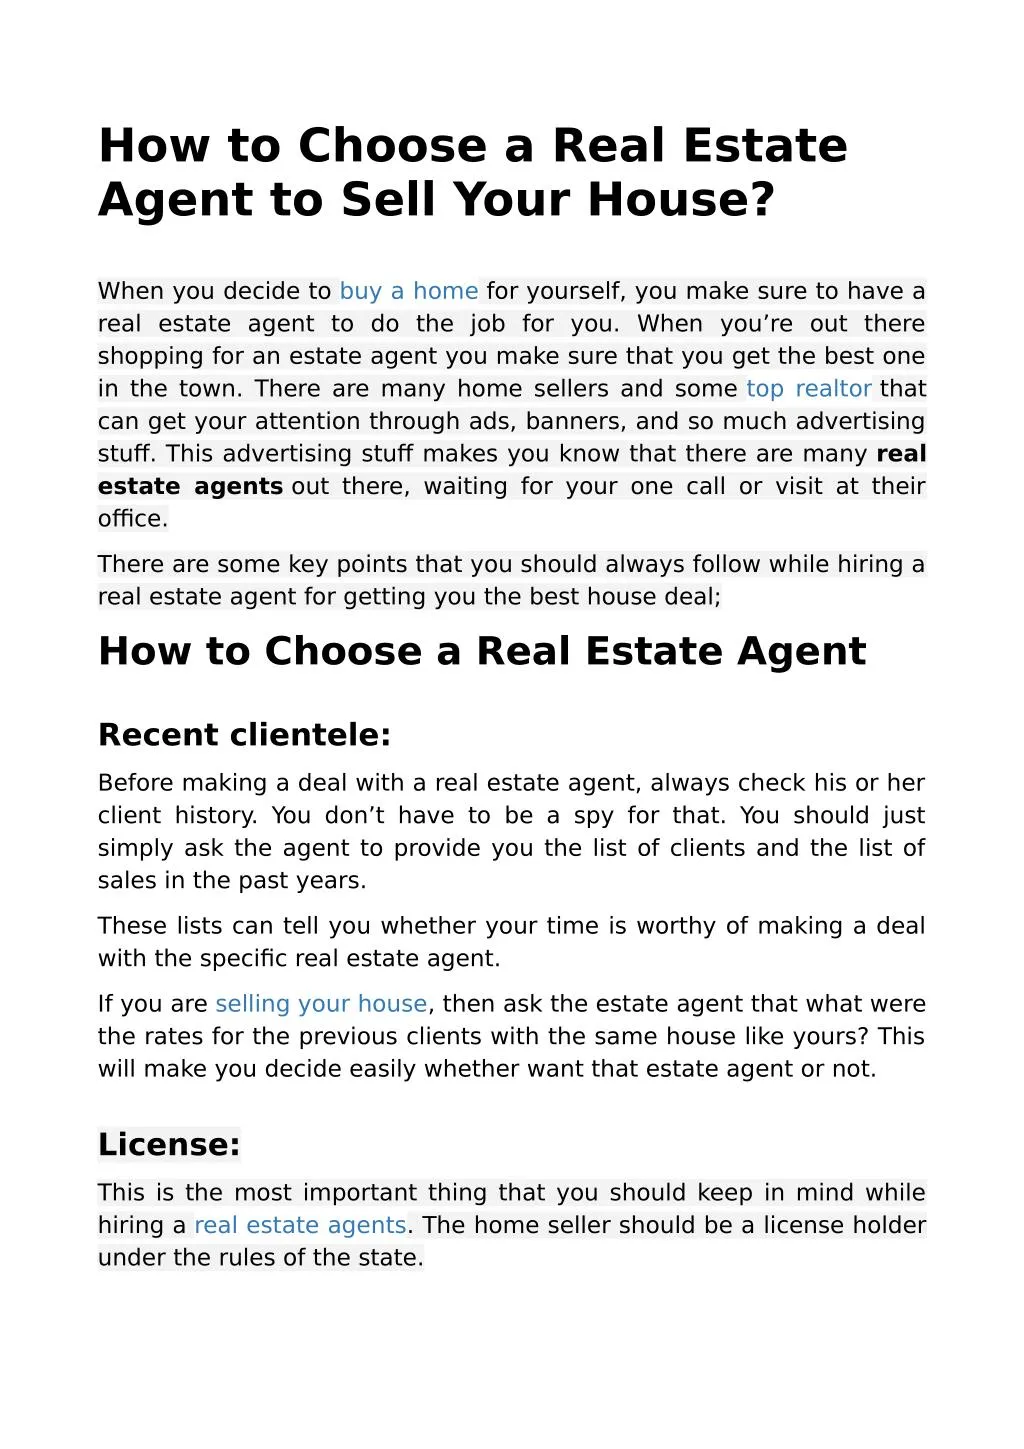 how to choose a real estate agent to sell your